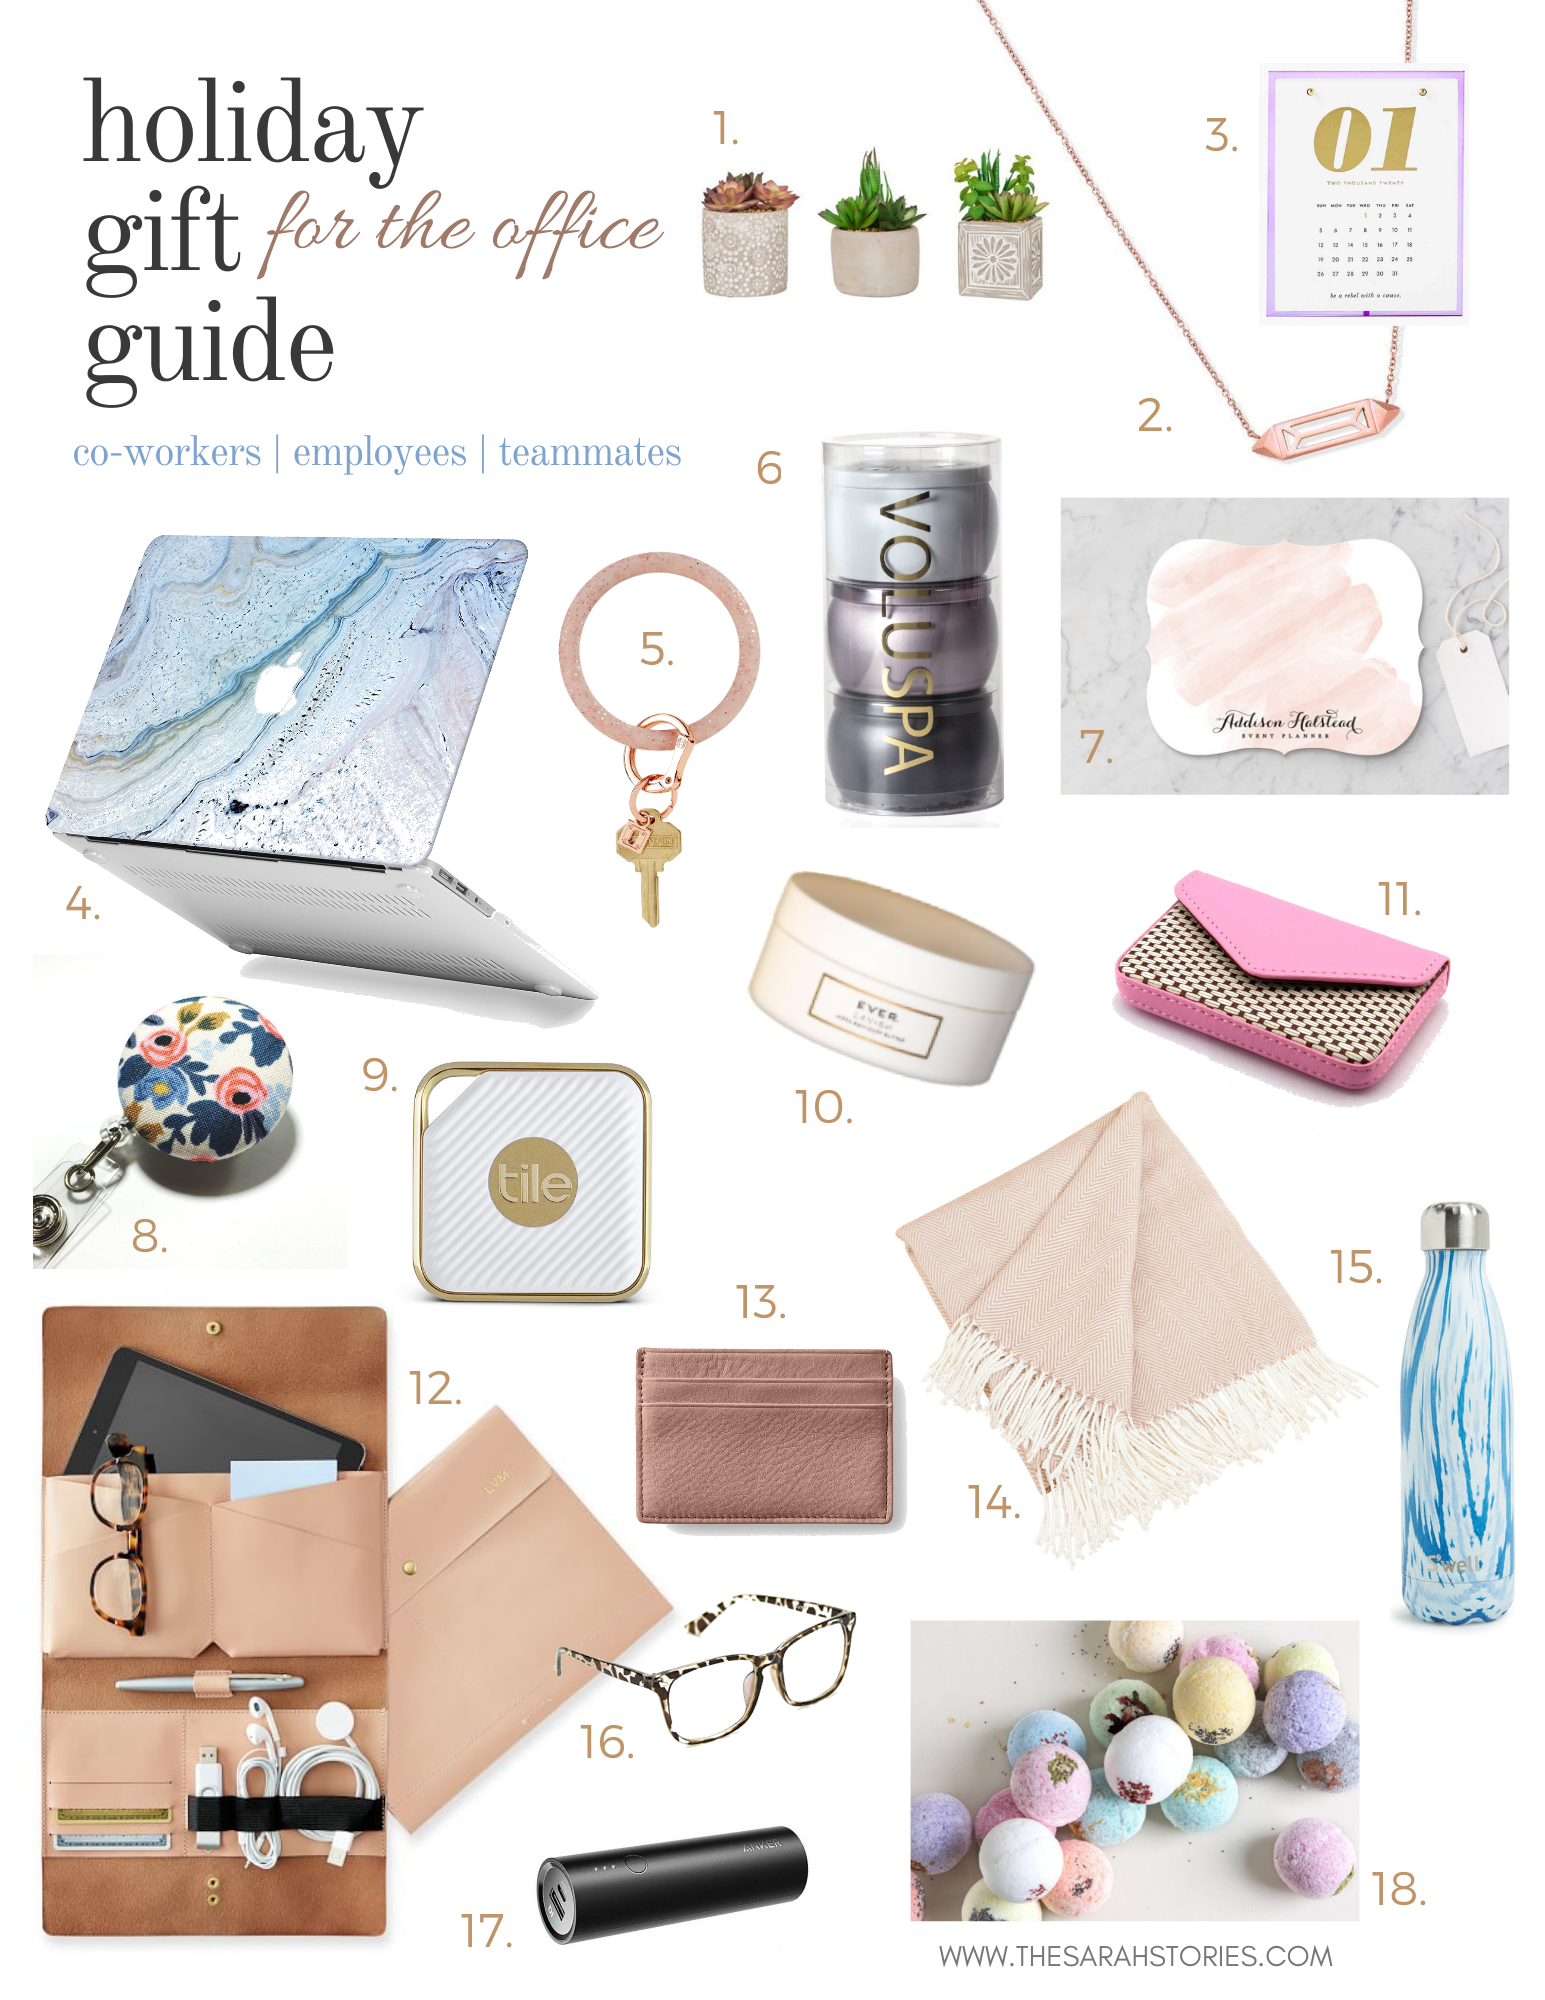 Holiday Gift guide for the office - the Sarah Stories